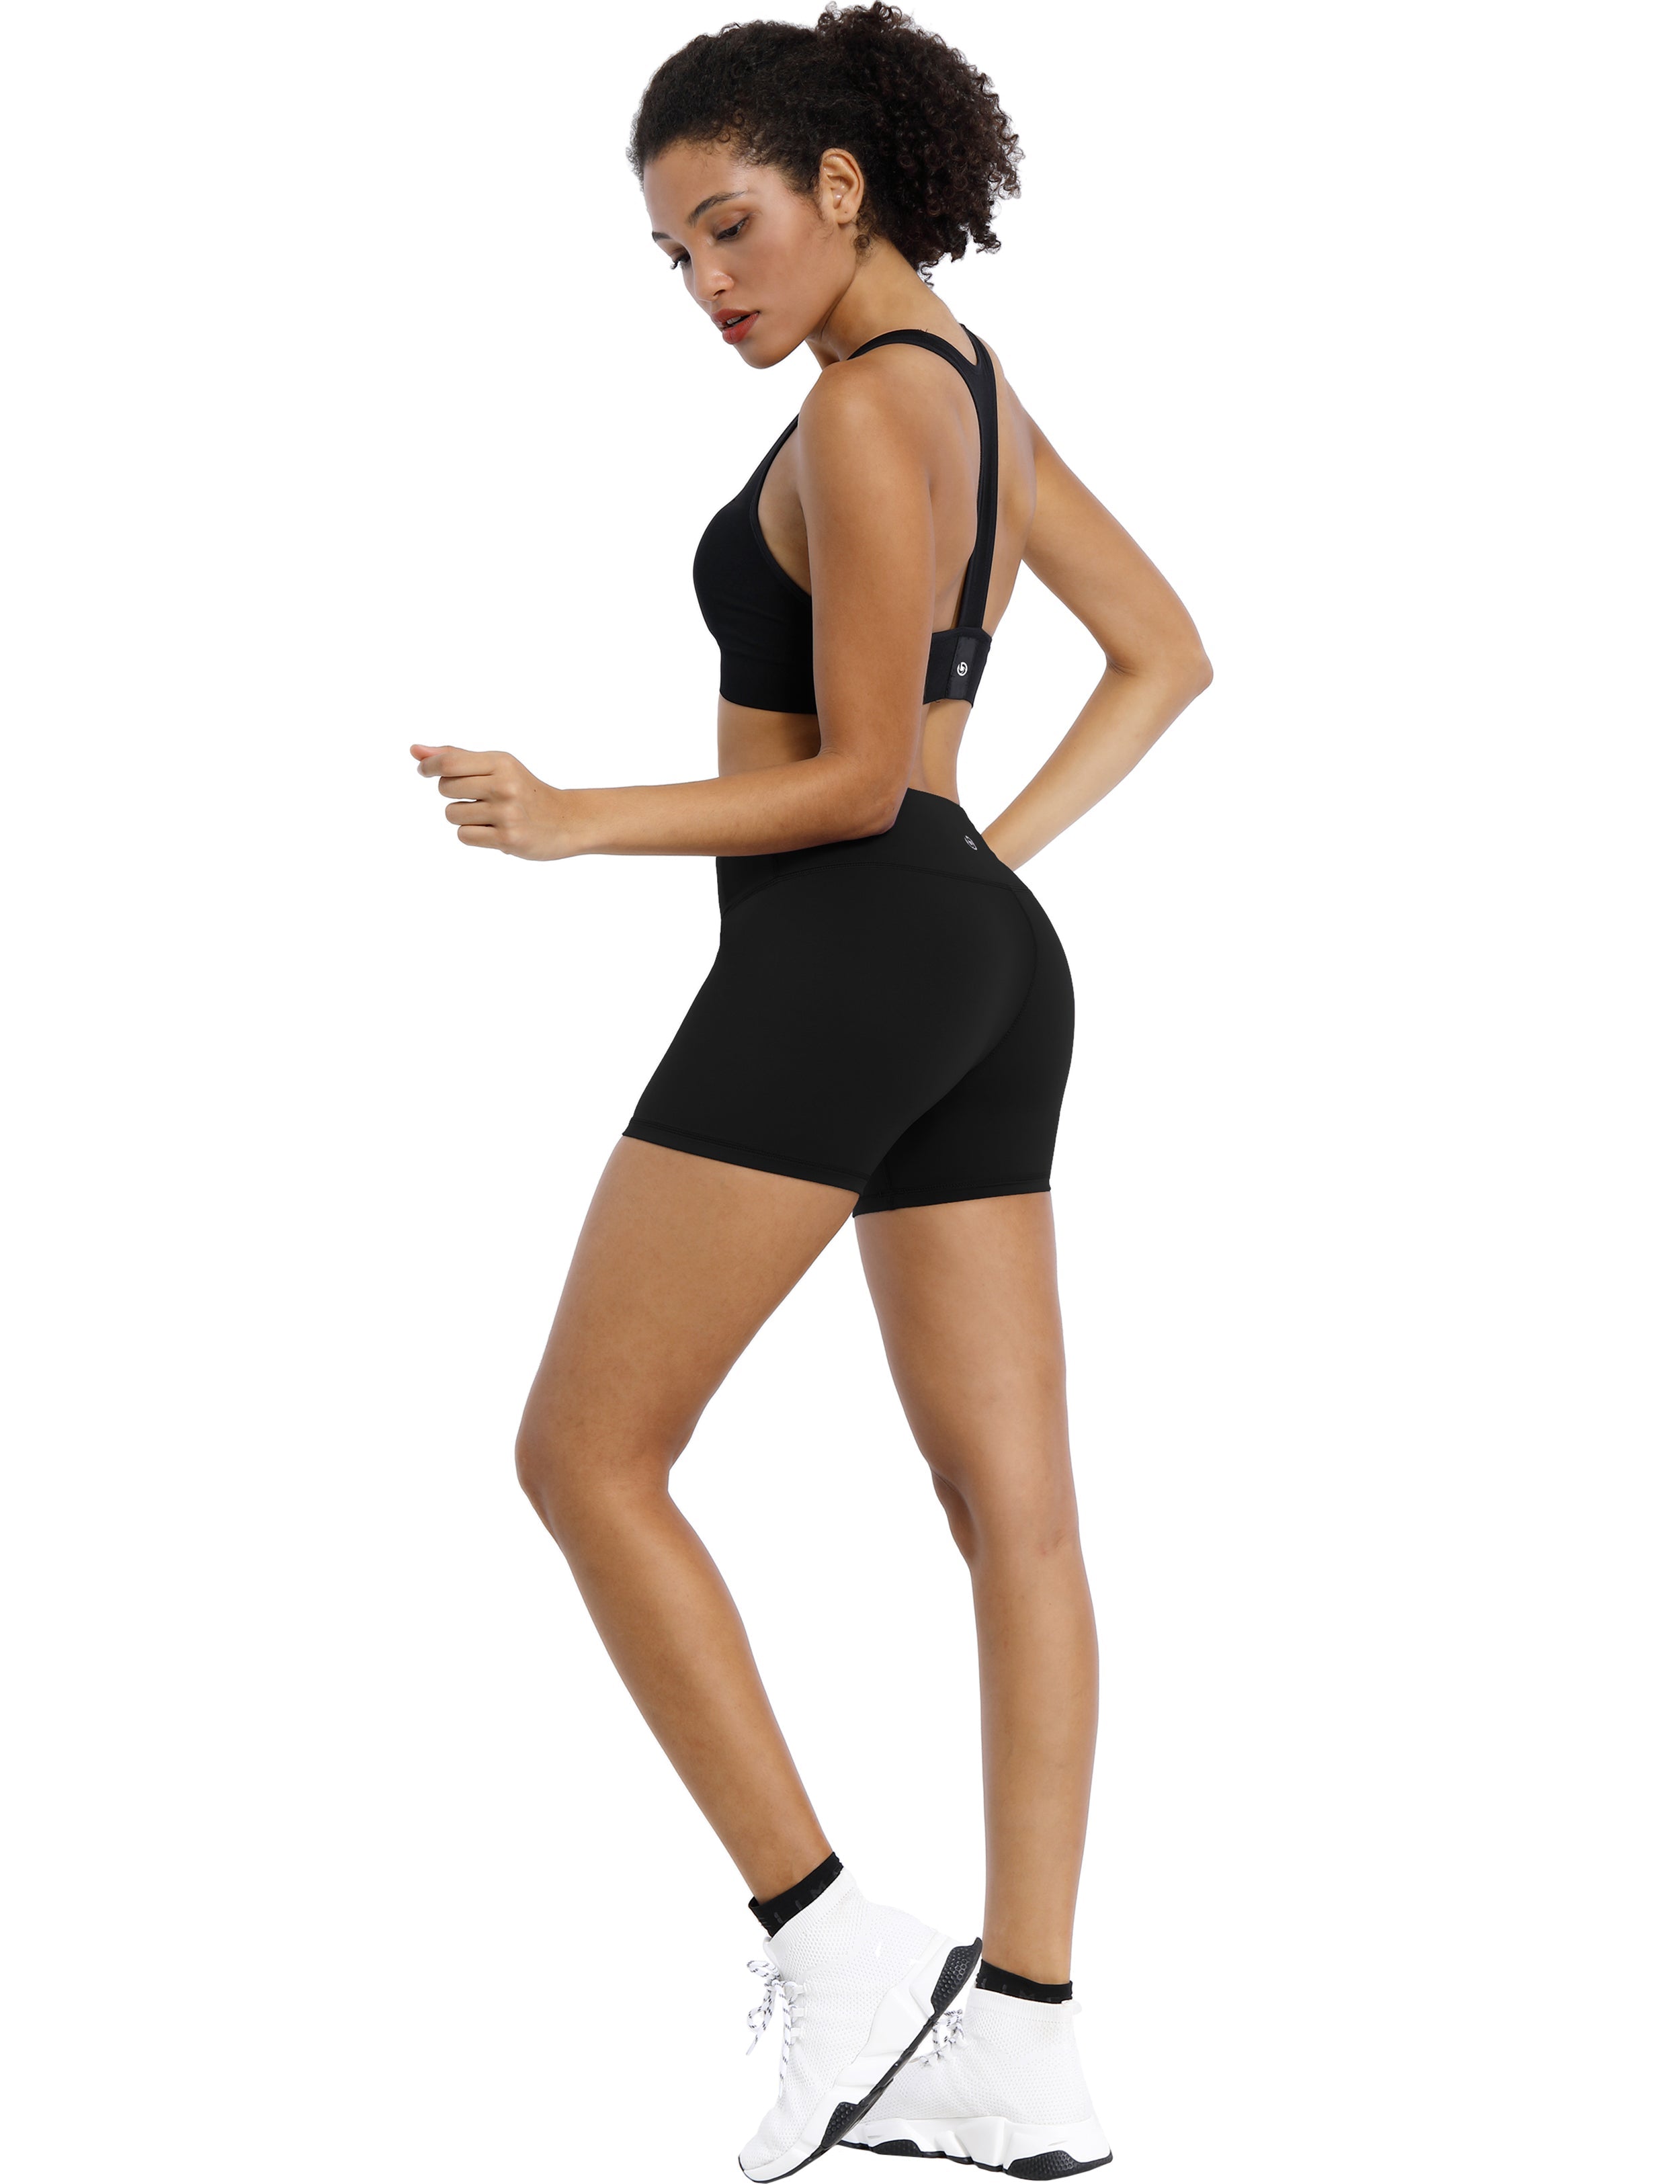 4" Gym Shorts black Sleek, soft, smooth and totally comfortable: our newest style is here. Softest-ever fabric High elasticity High density 4-way stretch Fabric doesn't attract lint easily No see-through Moisture-wicking Machine wash 75% Nylon, 25% Spandex